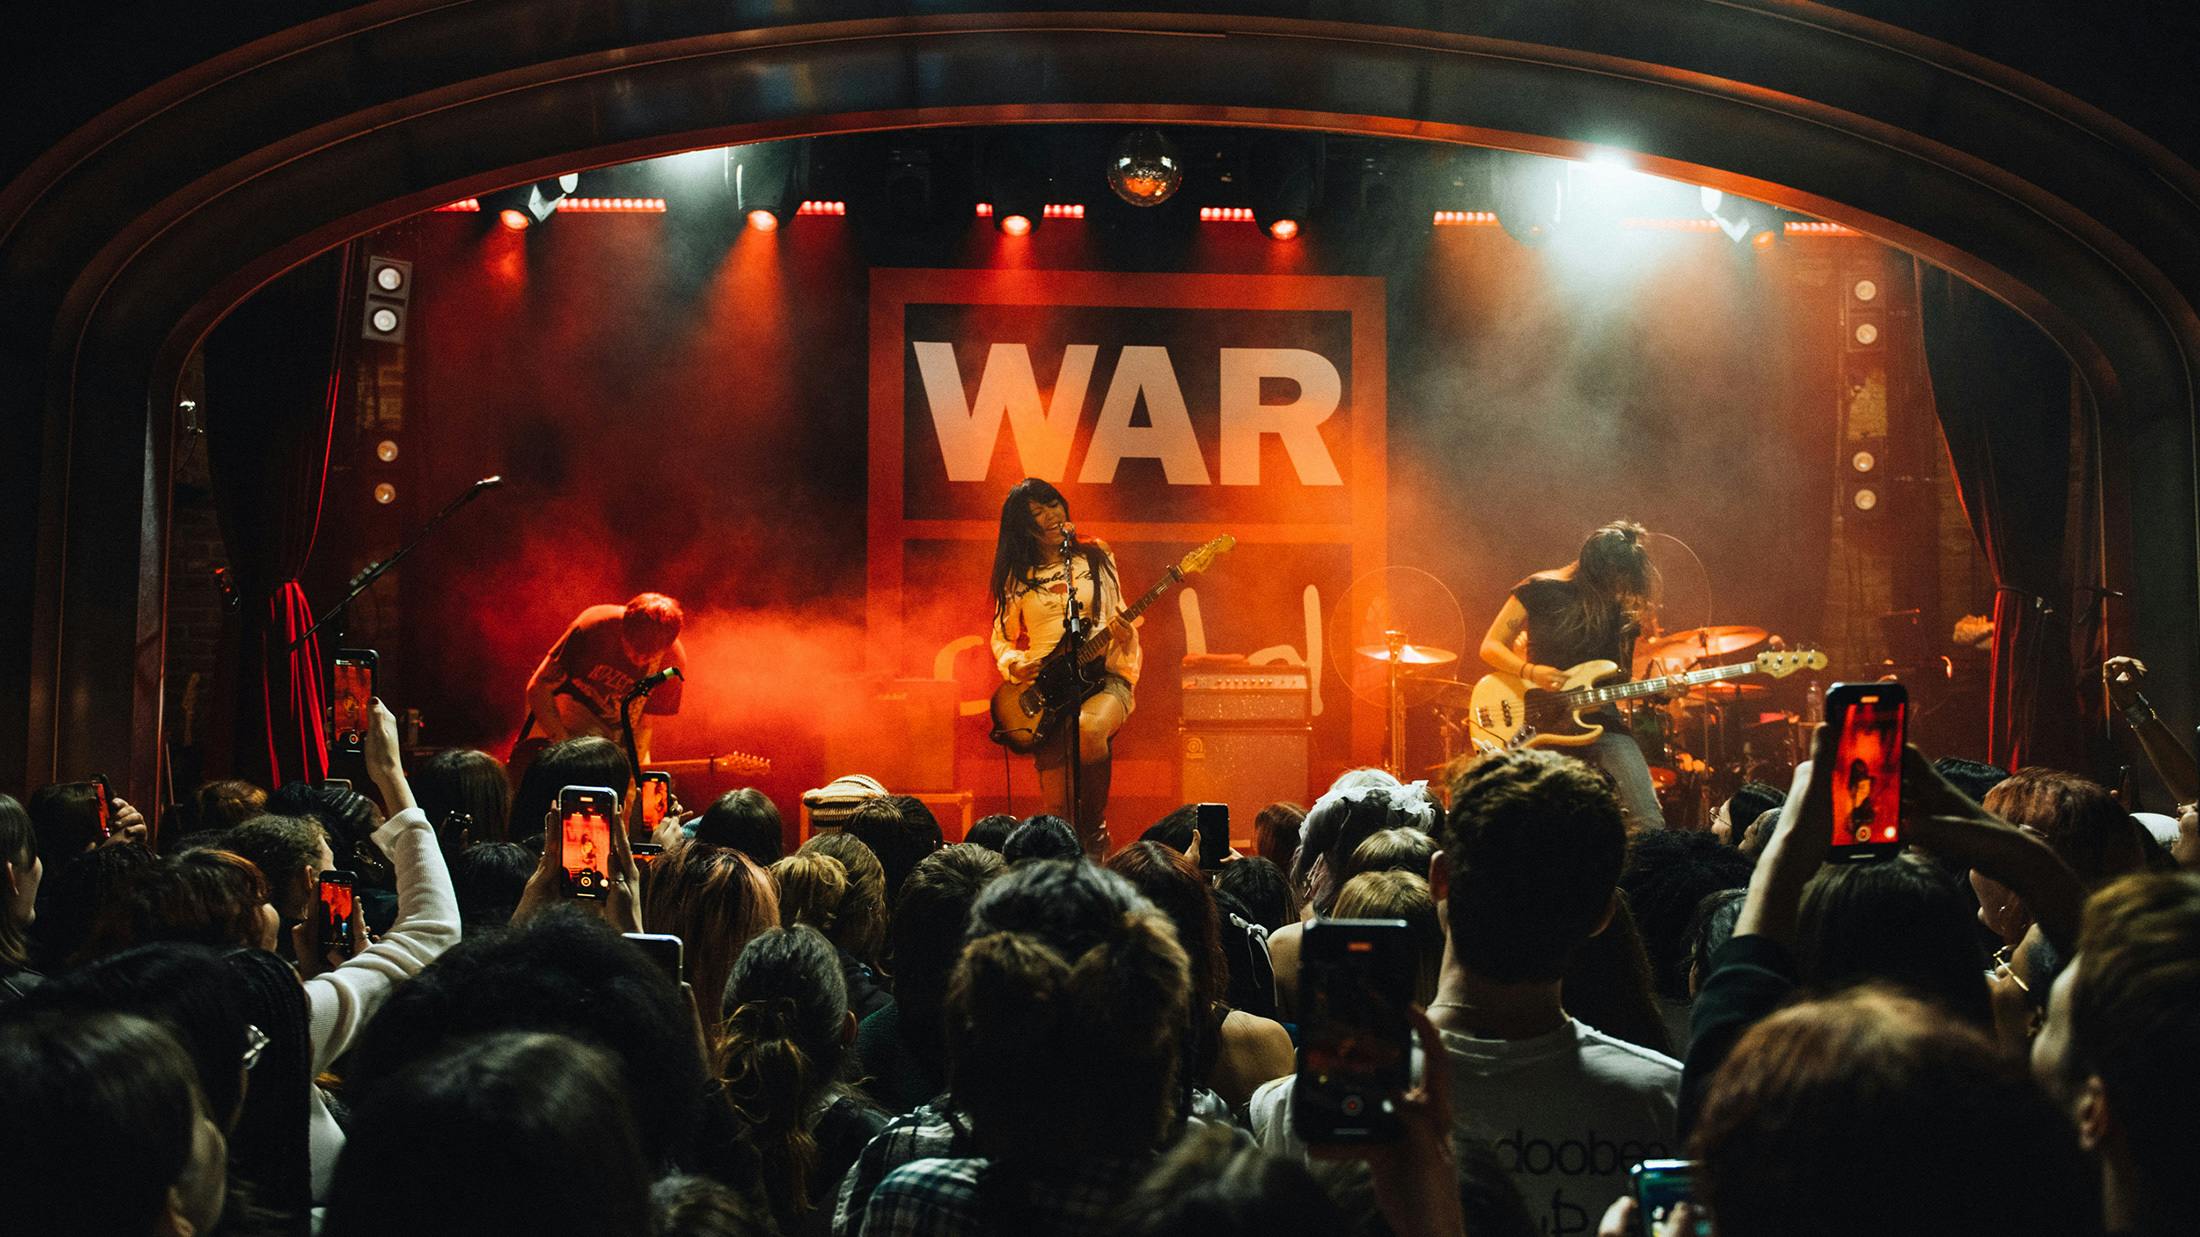 In pictures: beabadoobee hits London for War Child BRITS Week